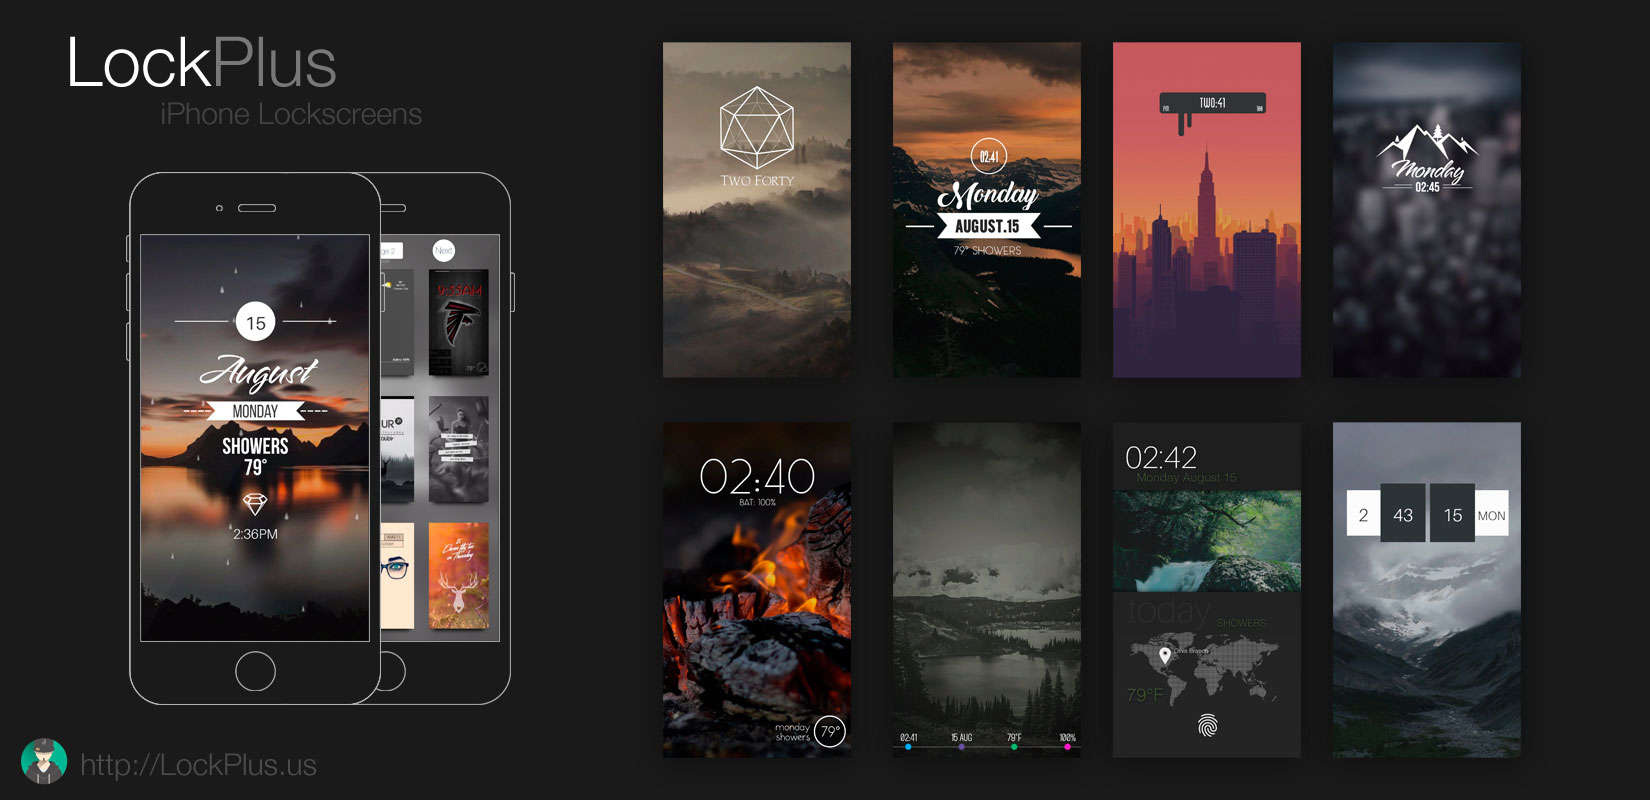 LockPlus, created by Jr, allows users to download thousands of different lock screen setups.